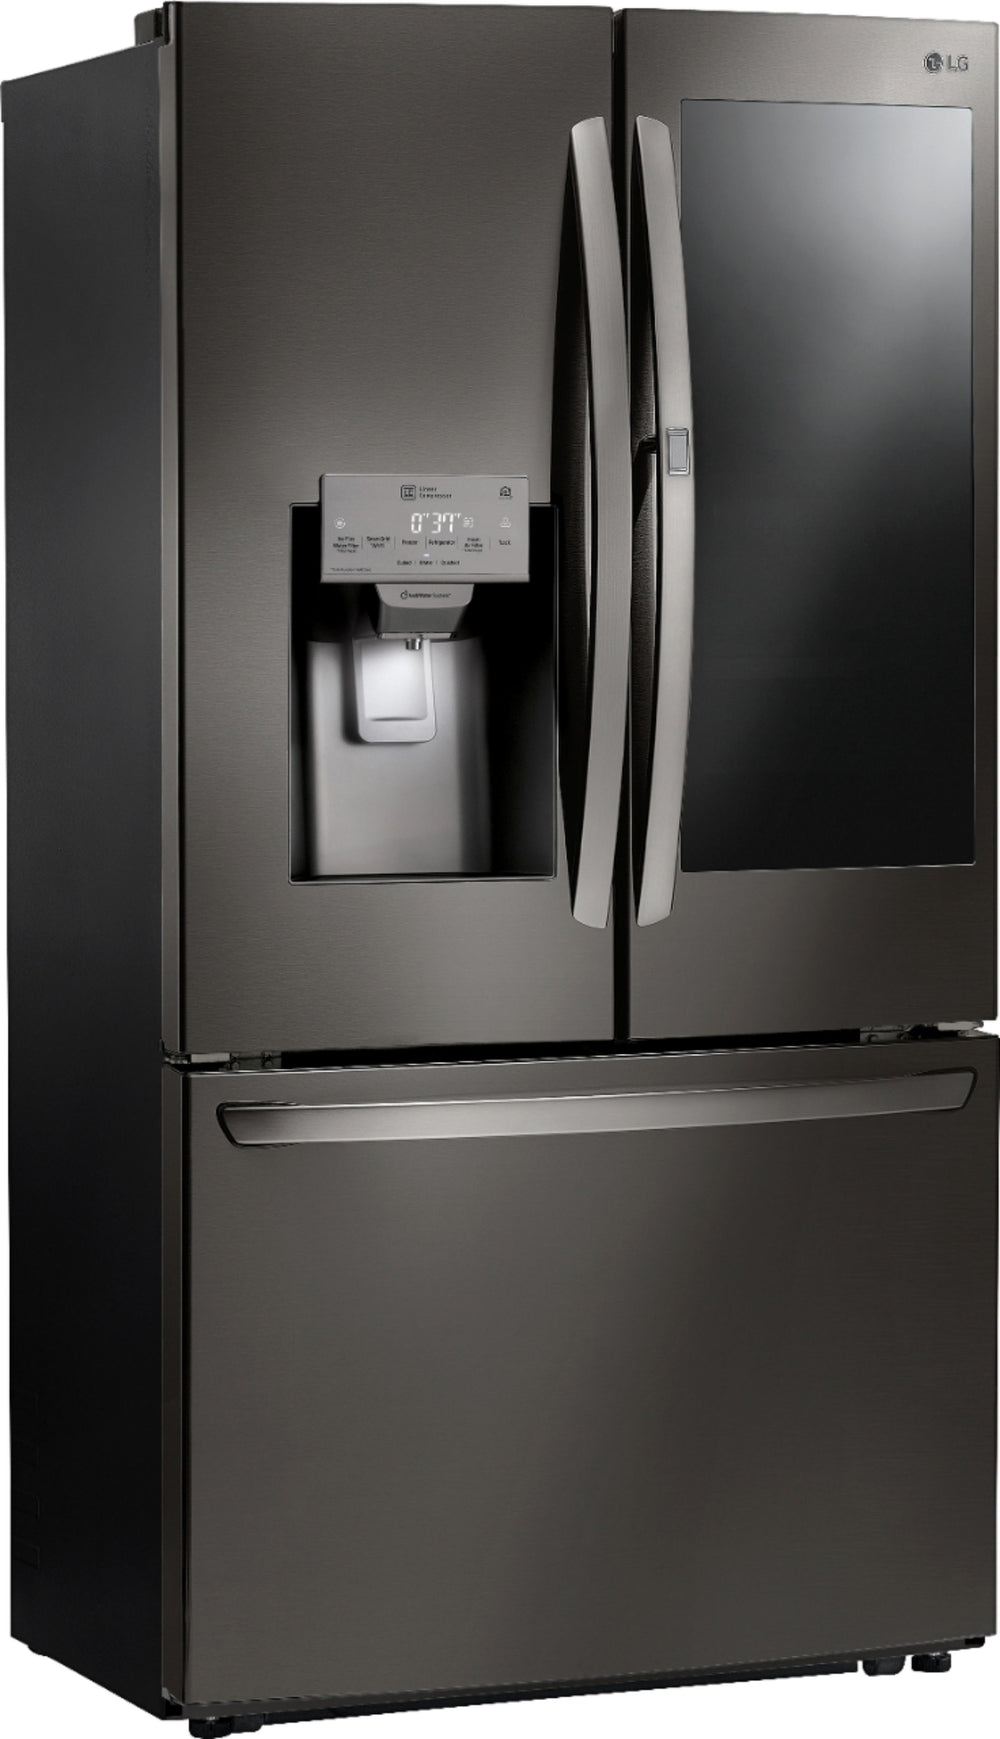 LG - 26 Cu. Ft. French Door-in-Door Smart Refrigerator with Dual Ice Maker and InstaView - Black stainless steel_1